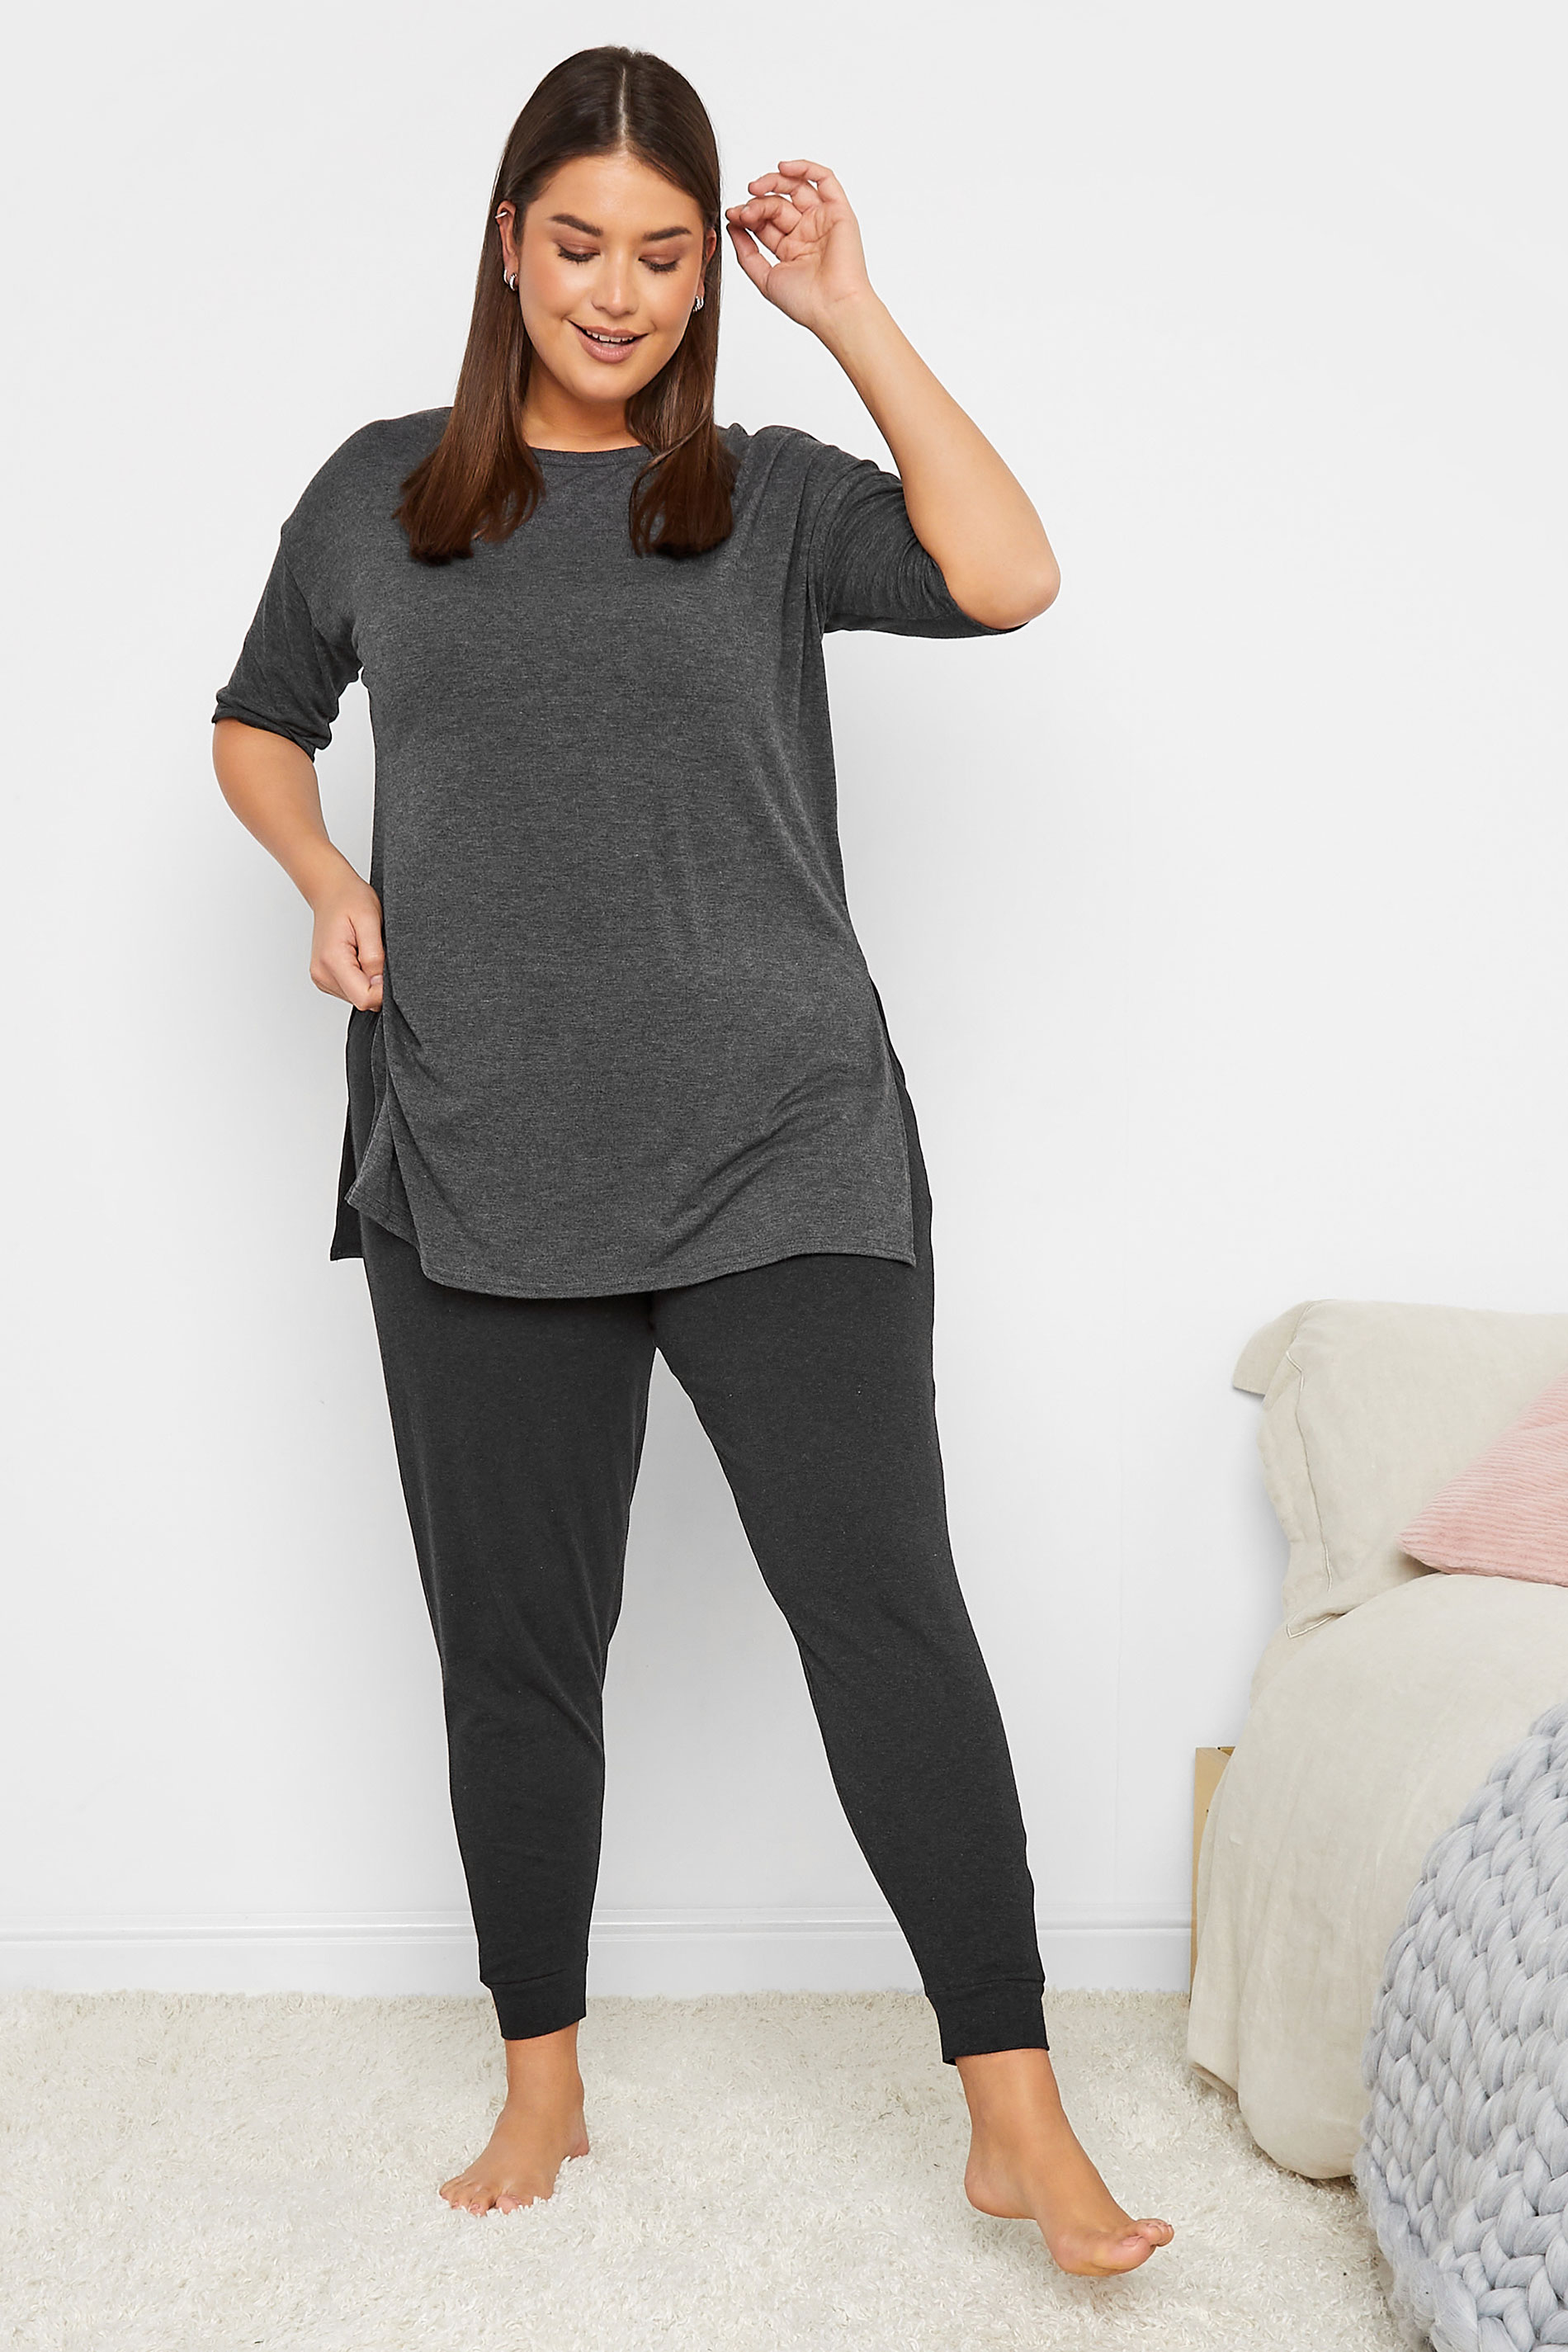 2 PACK Plus Size Black & Grey Cuffed Pyjama Bottoms | Yours Clothing 3